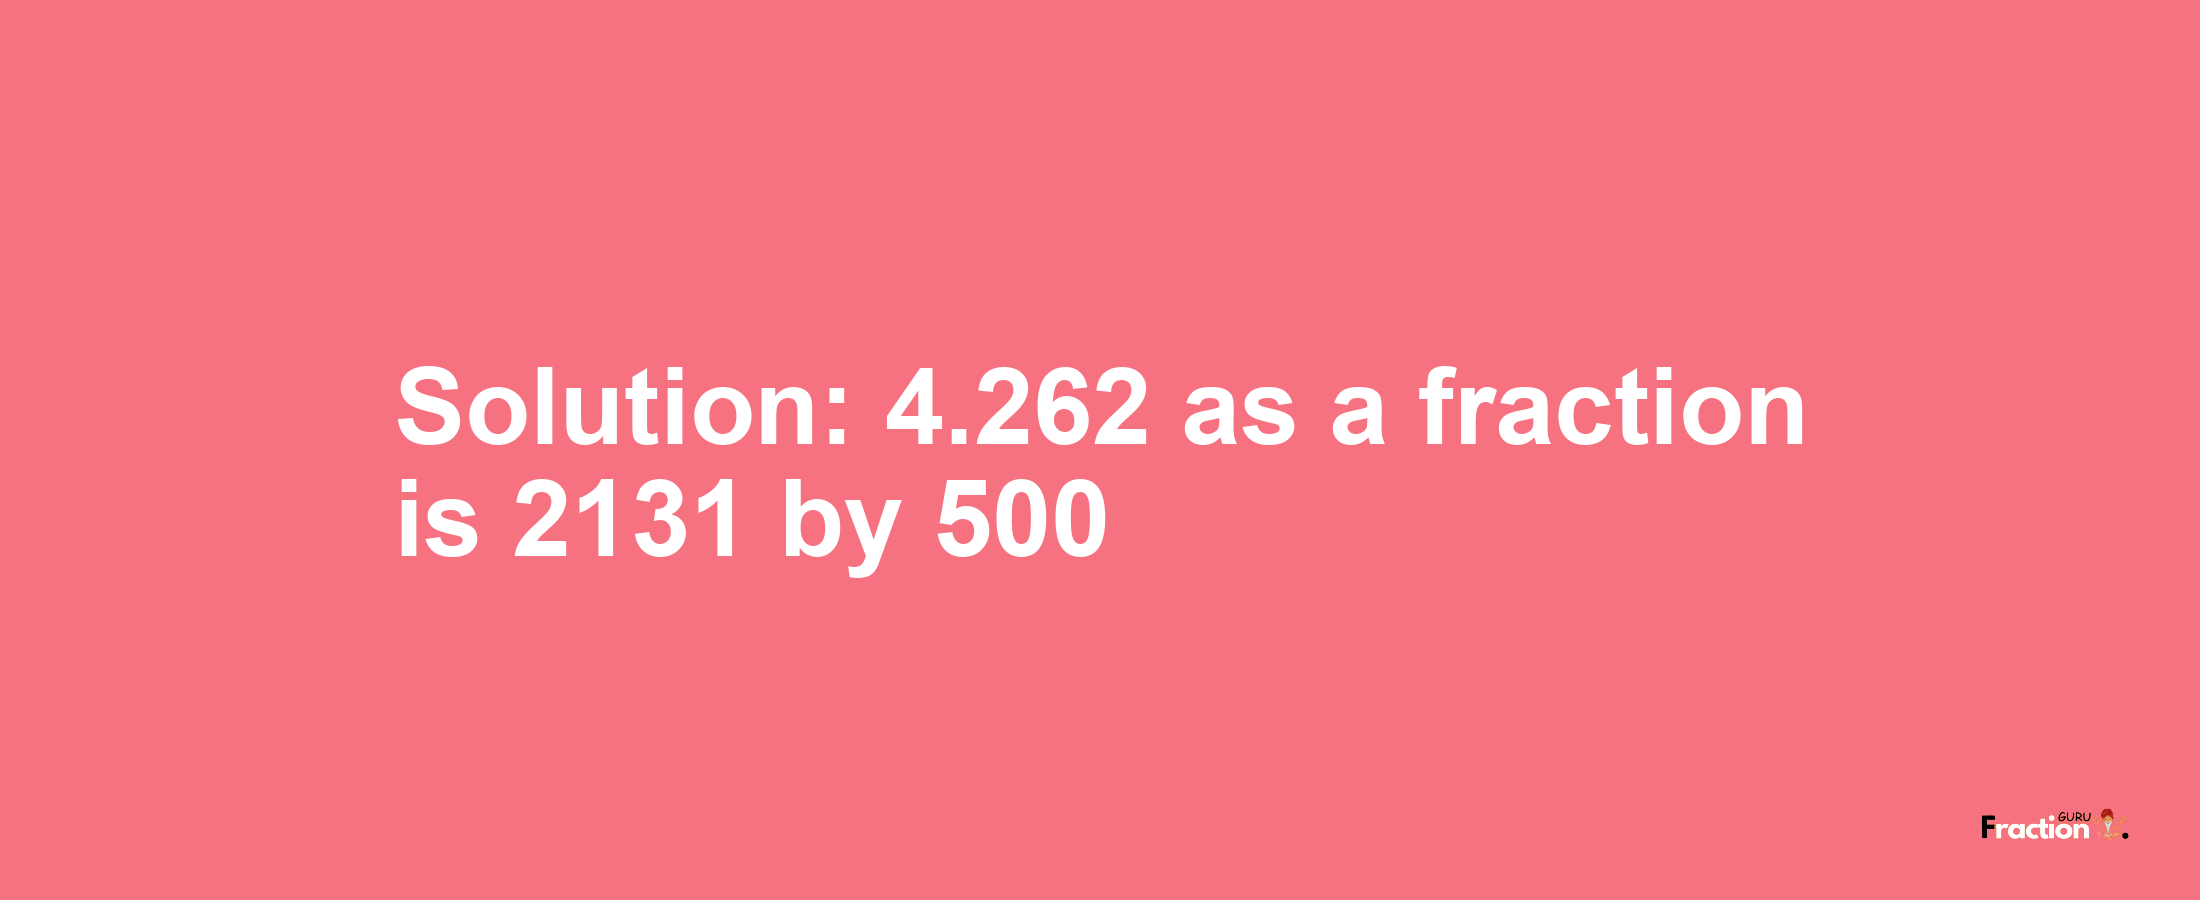 Solution:4.262 as a fraction is 2131/500